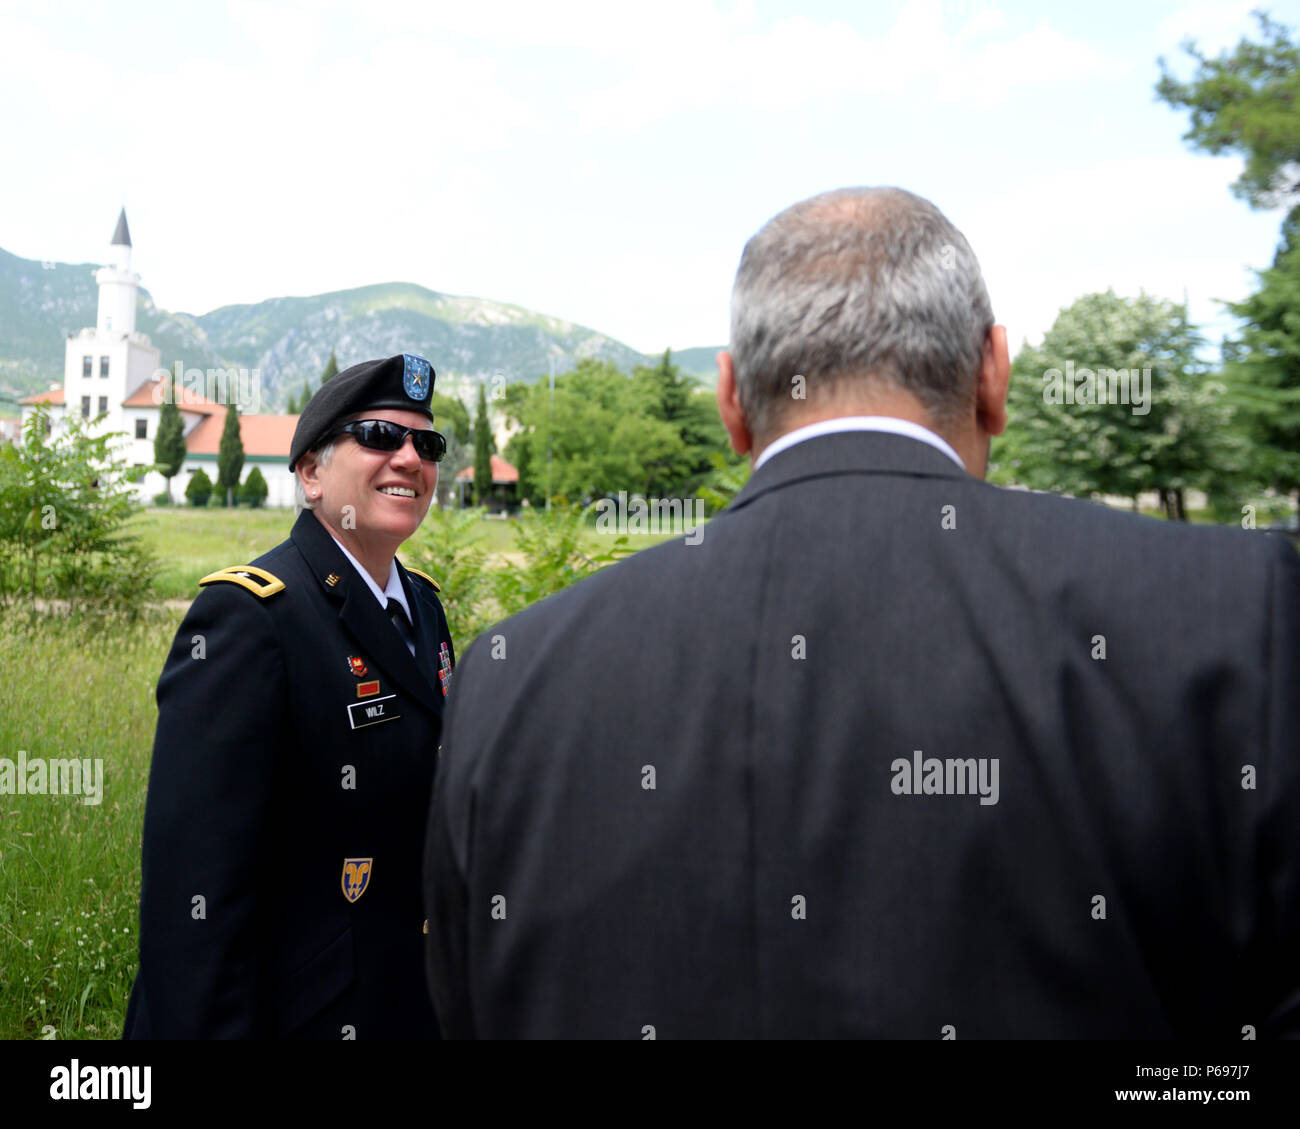 Brig. Gen. Giselle Wilz, NATO Headquarters Sarajevo commander, Brig. Gen. Giselle Wilz, NATO Headquarters Sarajevo commander, talks with Professor Sead Pašić, Džemal Bijedić University rector, in Mostar, Bosnia and Herzegovina, May 23, 2016. The general and Edward Ferguson, the British Ambassador to BiH, gave a lecture to more than 100 students at the university on the political aspects of the Euro-Atlantic integration and the importance of NATO as well as successes of BiH armed forces in regards to defense reform. After their presentations, the key NATO leaders in BiH engaged in a lively dial Stock Photo